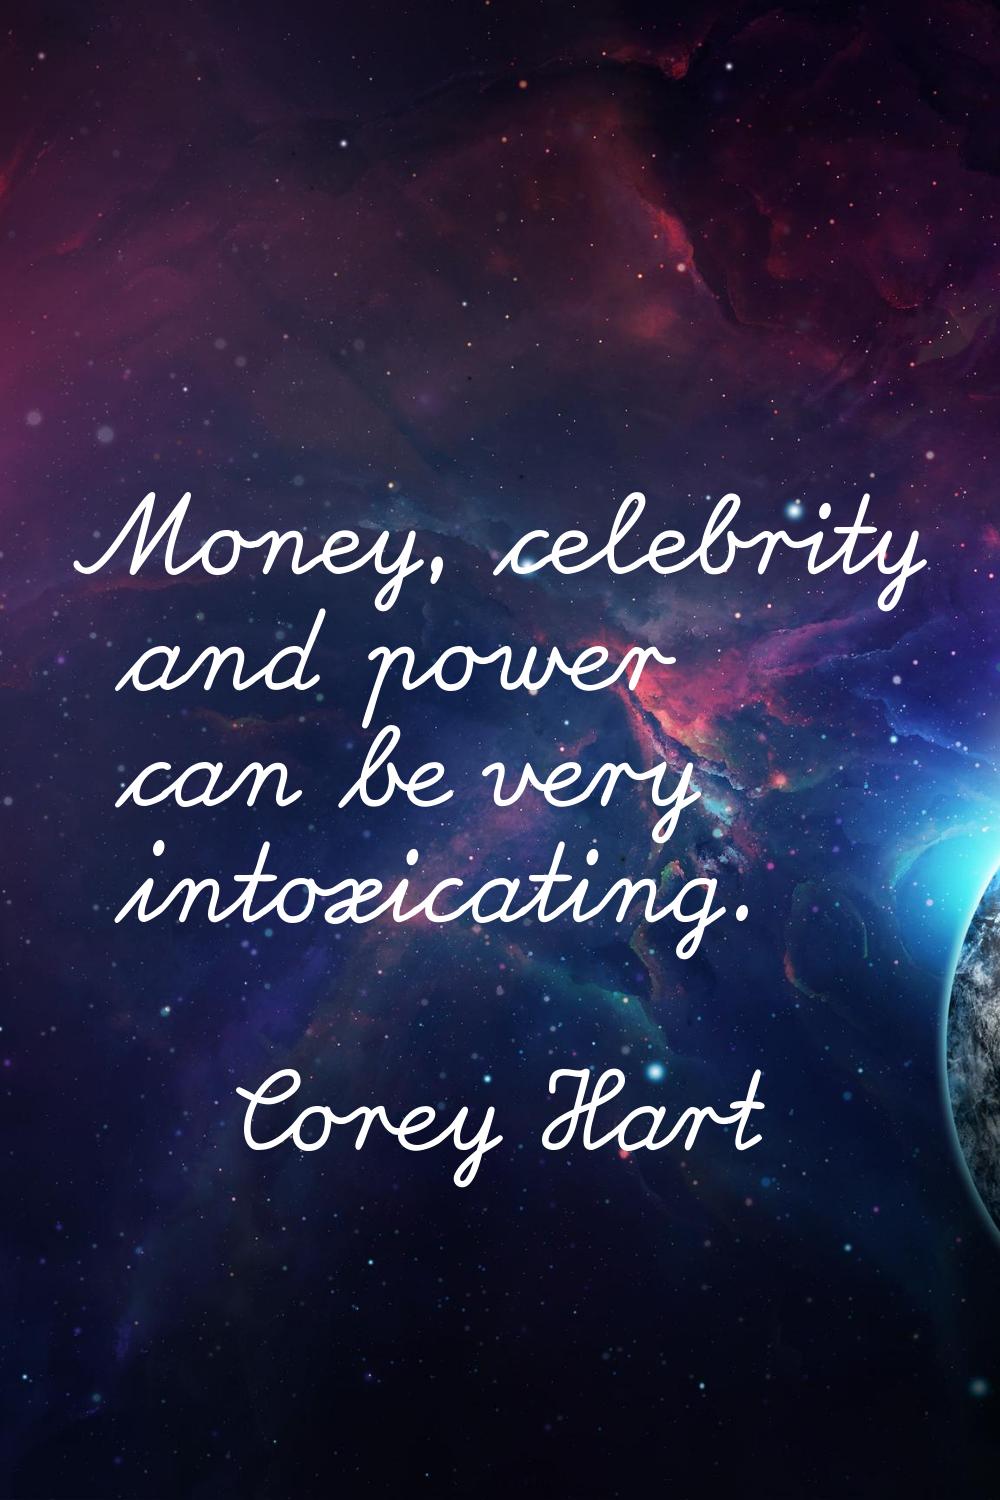 Money, celebrity and power can be very intoxicating.